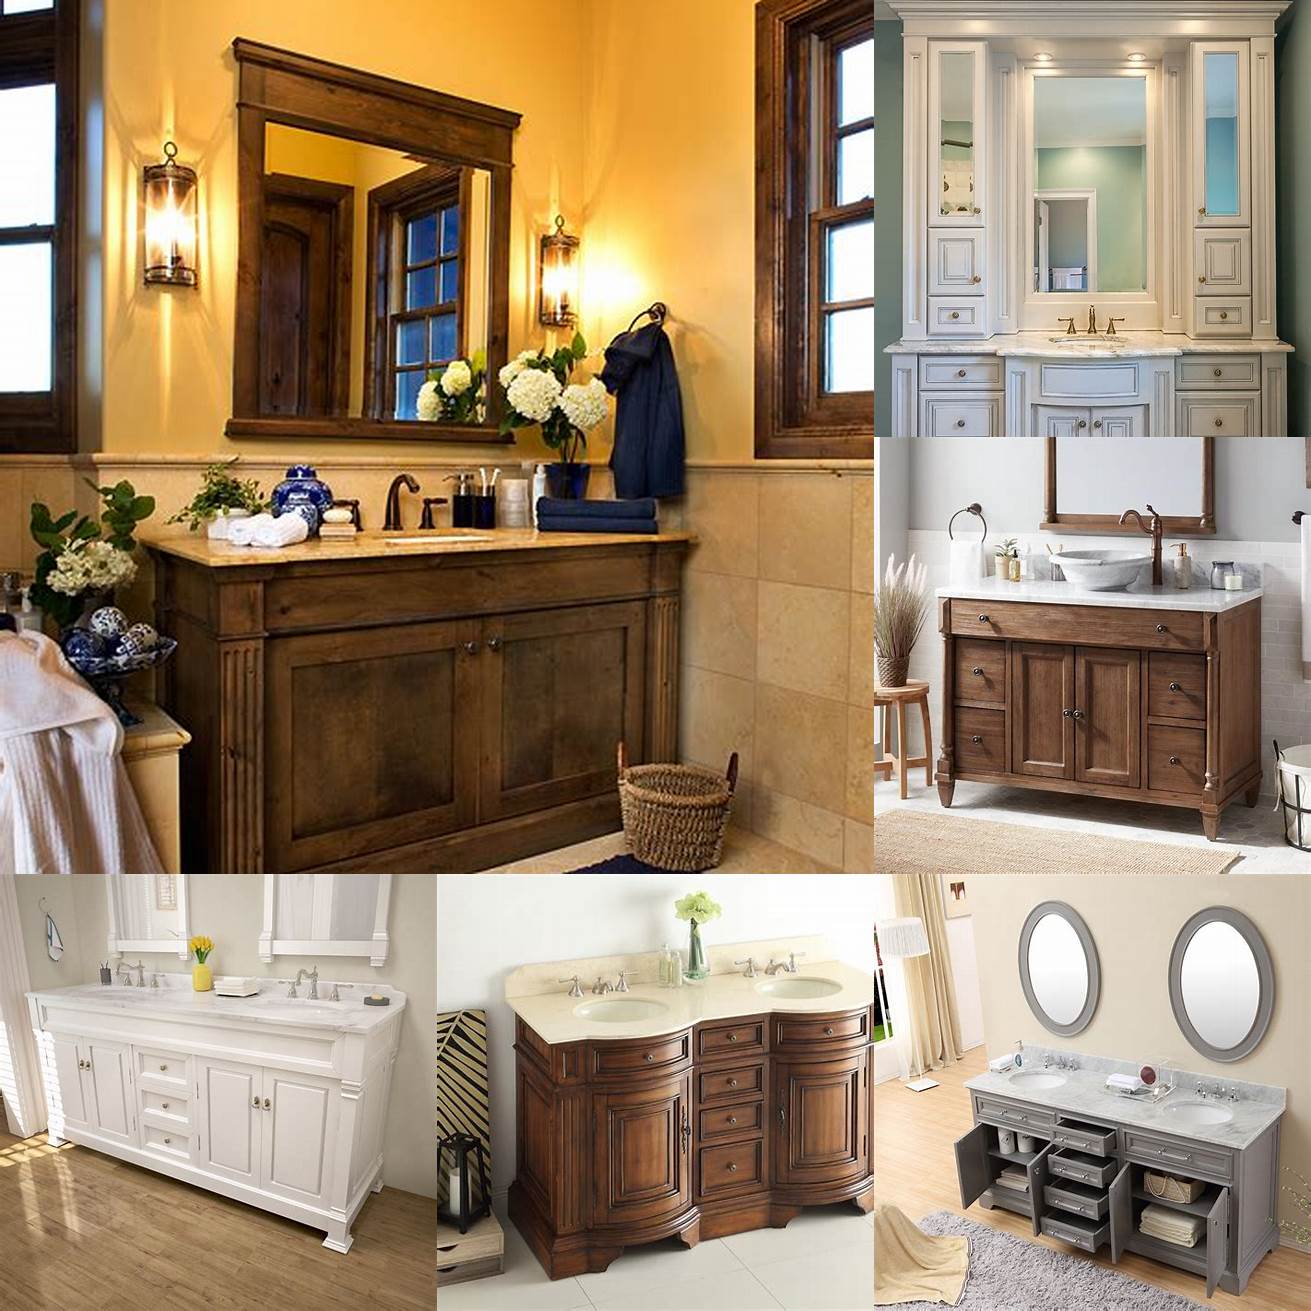 It is more expensive than traditional bathroom vanities